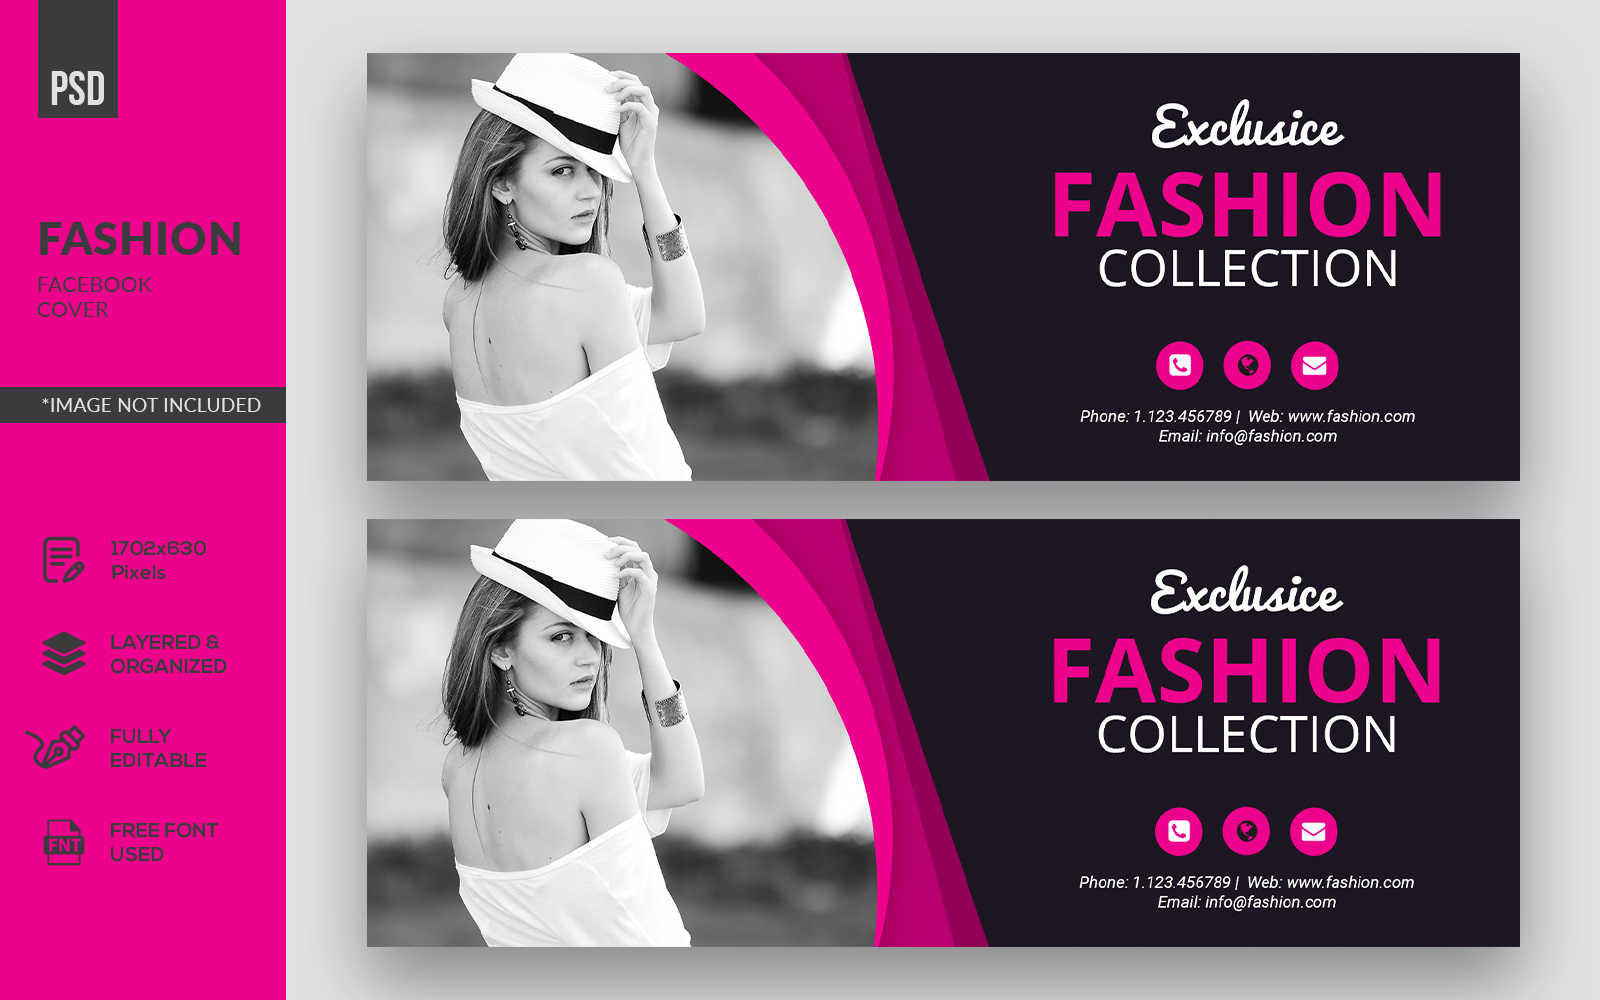 Fashion Facebook Covers - Corporate Identity Template